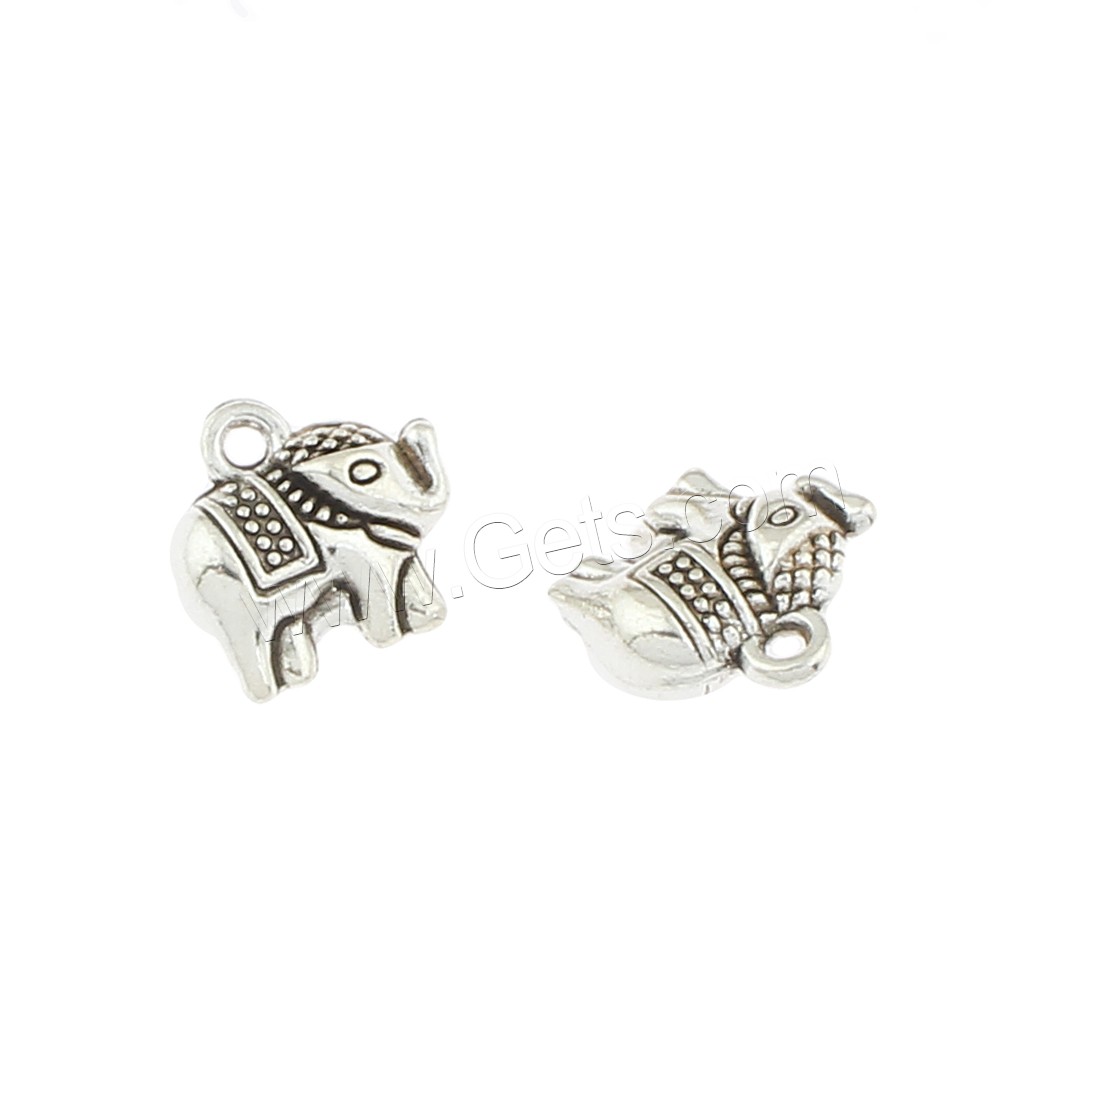 Zinc Alloy Animal Pendants, Elephant, antique silver color plated, 11x11x5mm, Hole:Approx 1mm, Approx 350PCs/Bag, Sold By Bag